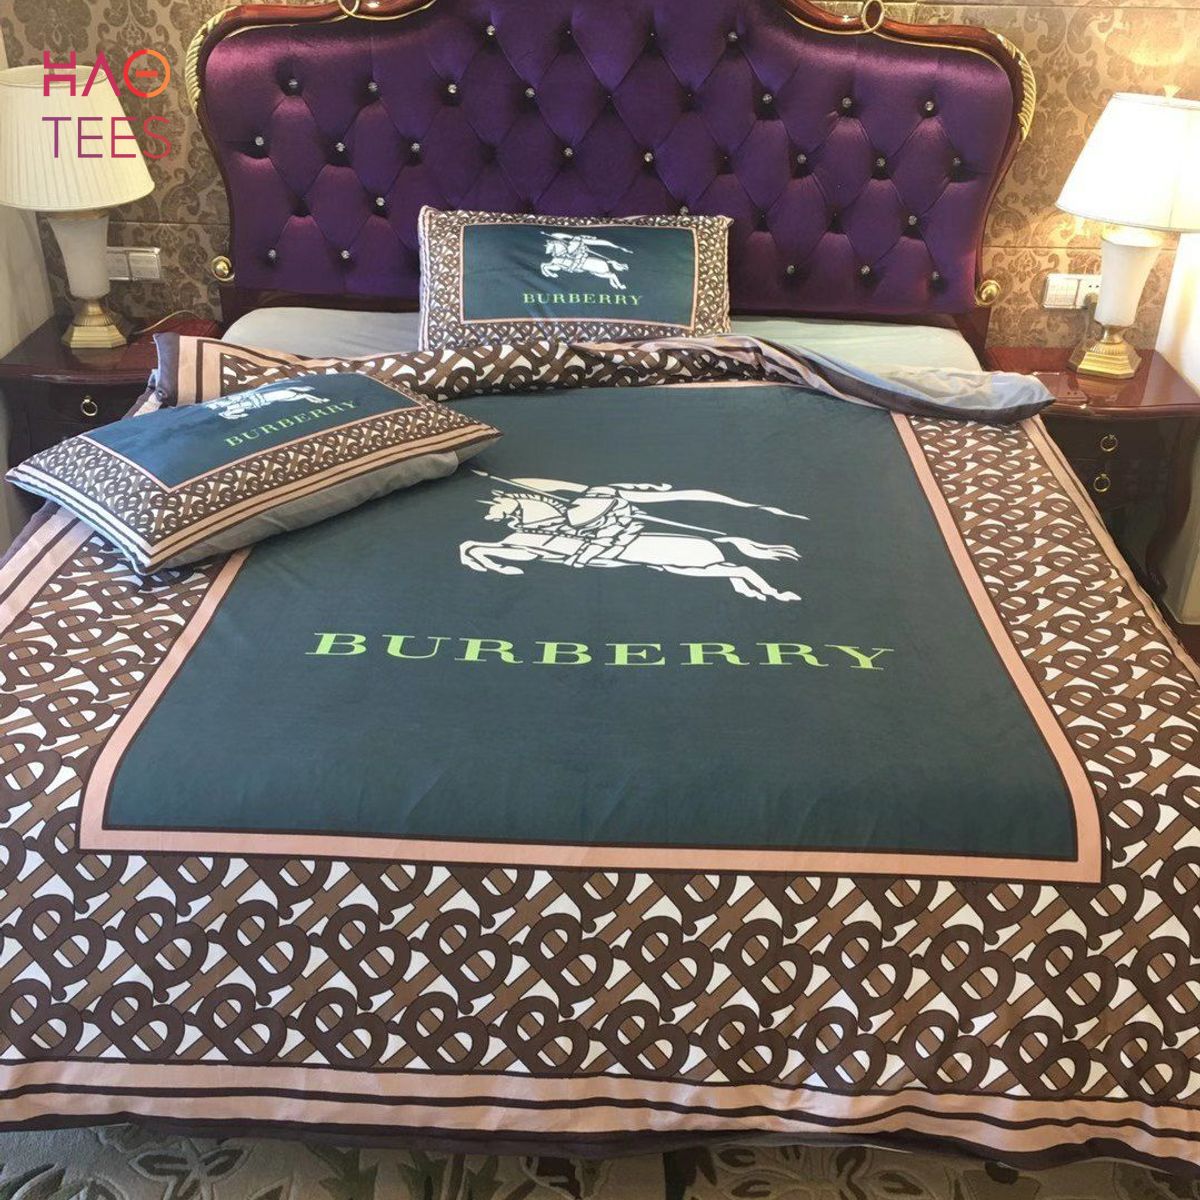 HOT Burberry London Luxury Brand Bedding Sets Green Duvet Cover Limited Edition